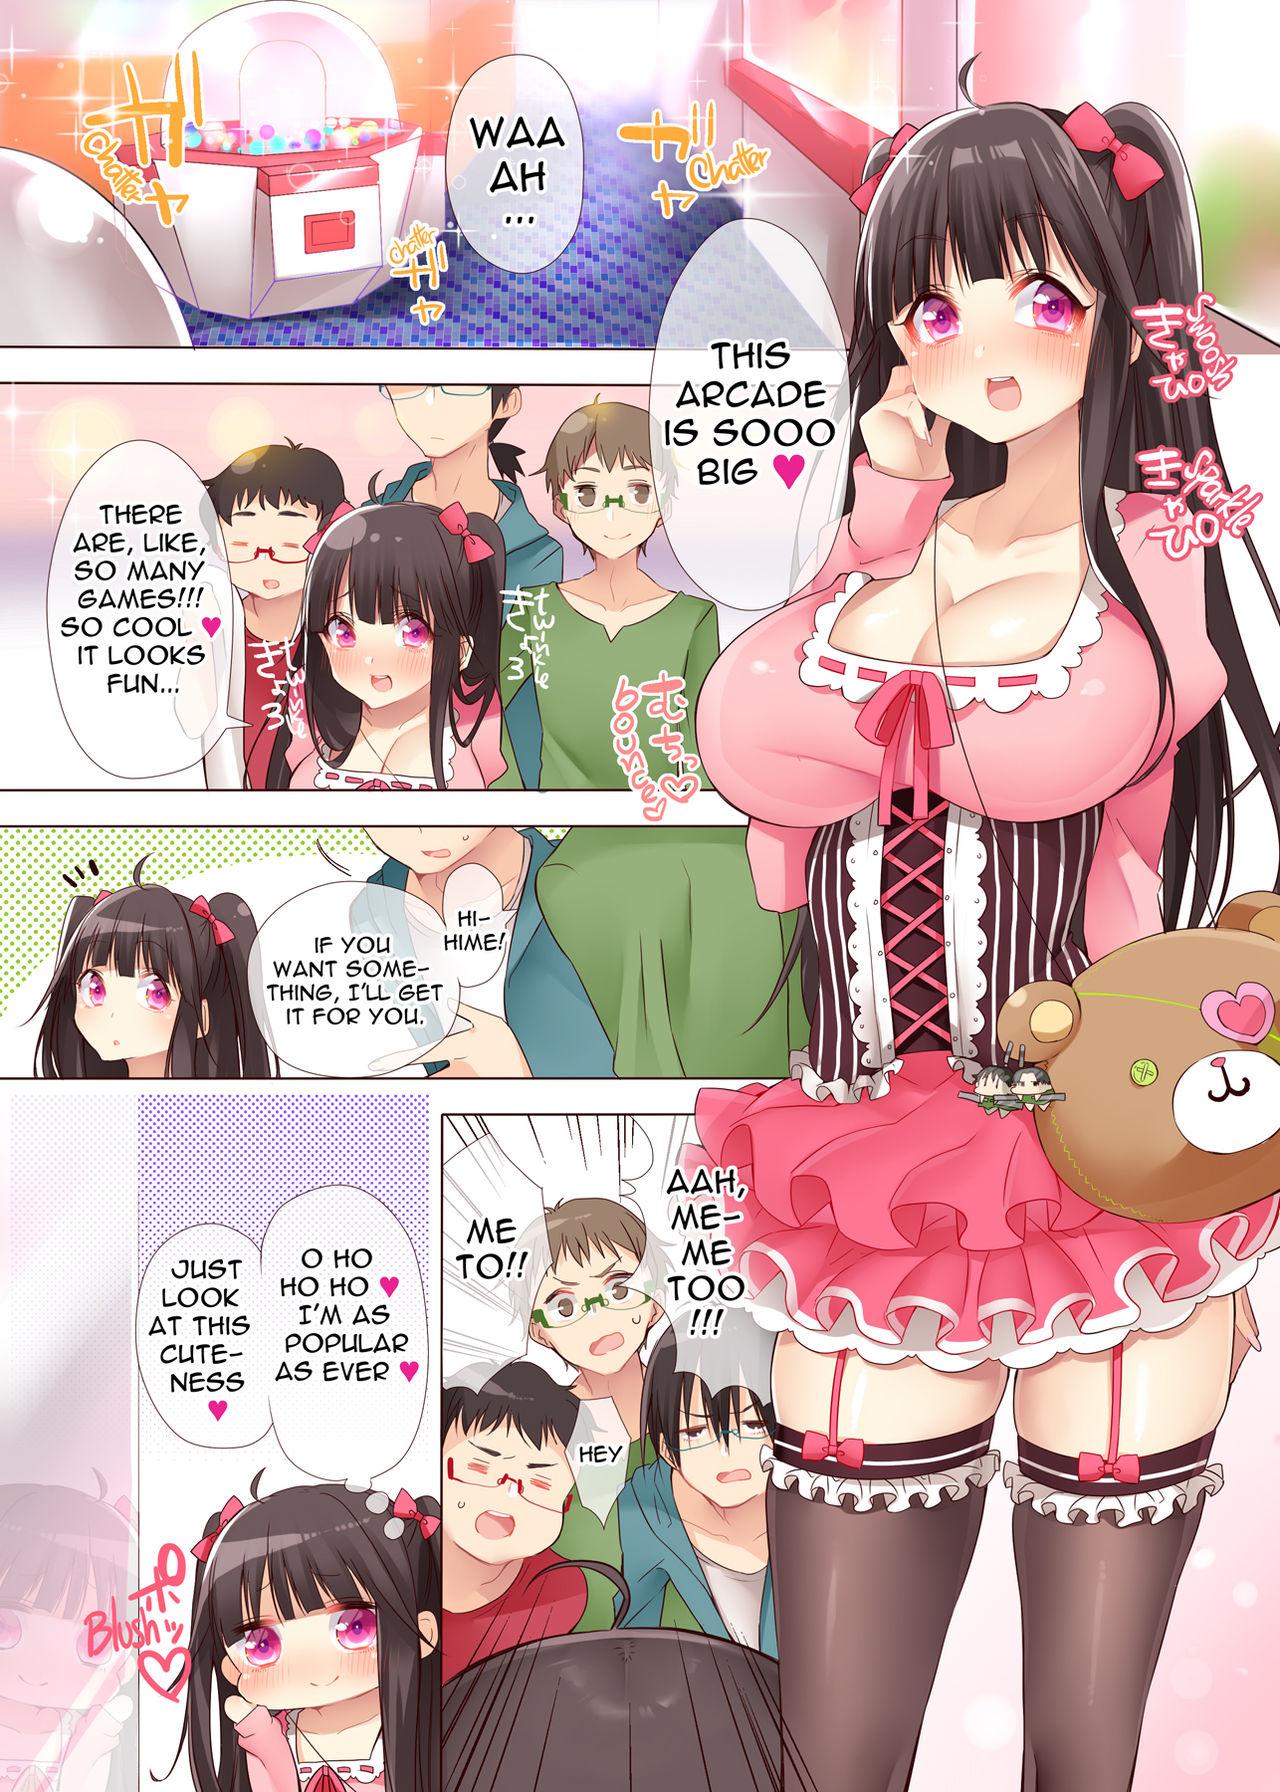 Athletic The Princess of an Otaku Group Got Knocked Up by Some Piece of Trash So She Let an Otaku Guy Do Her Too!? Putaria - Page 2